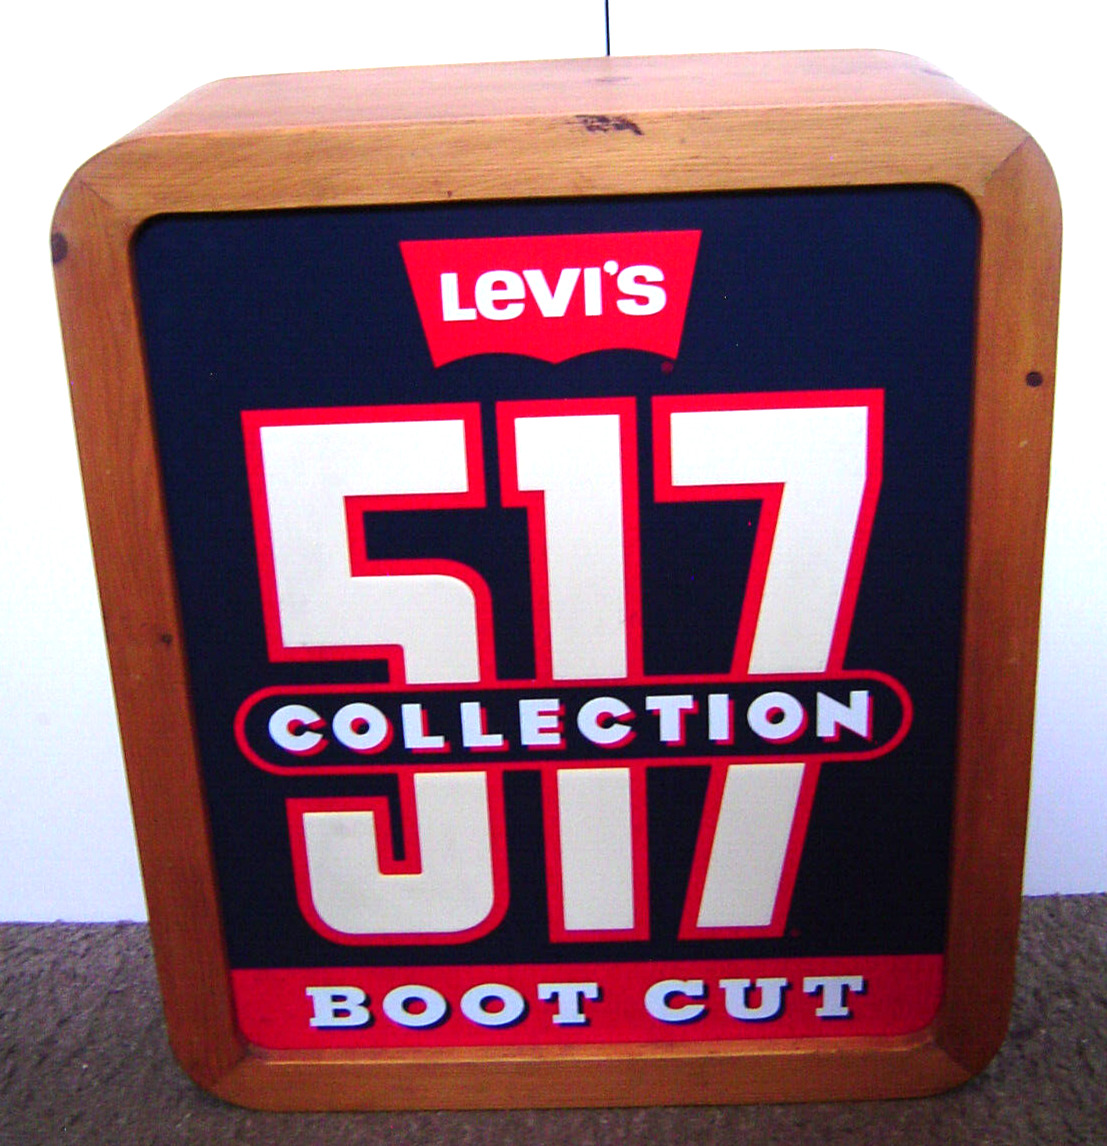 Vintage Levis 517 Collection Boot Cut Advertising Store Sign 2 Sided Wooden Fram